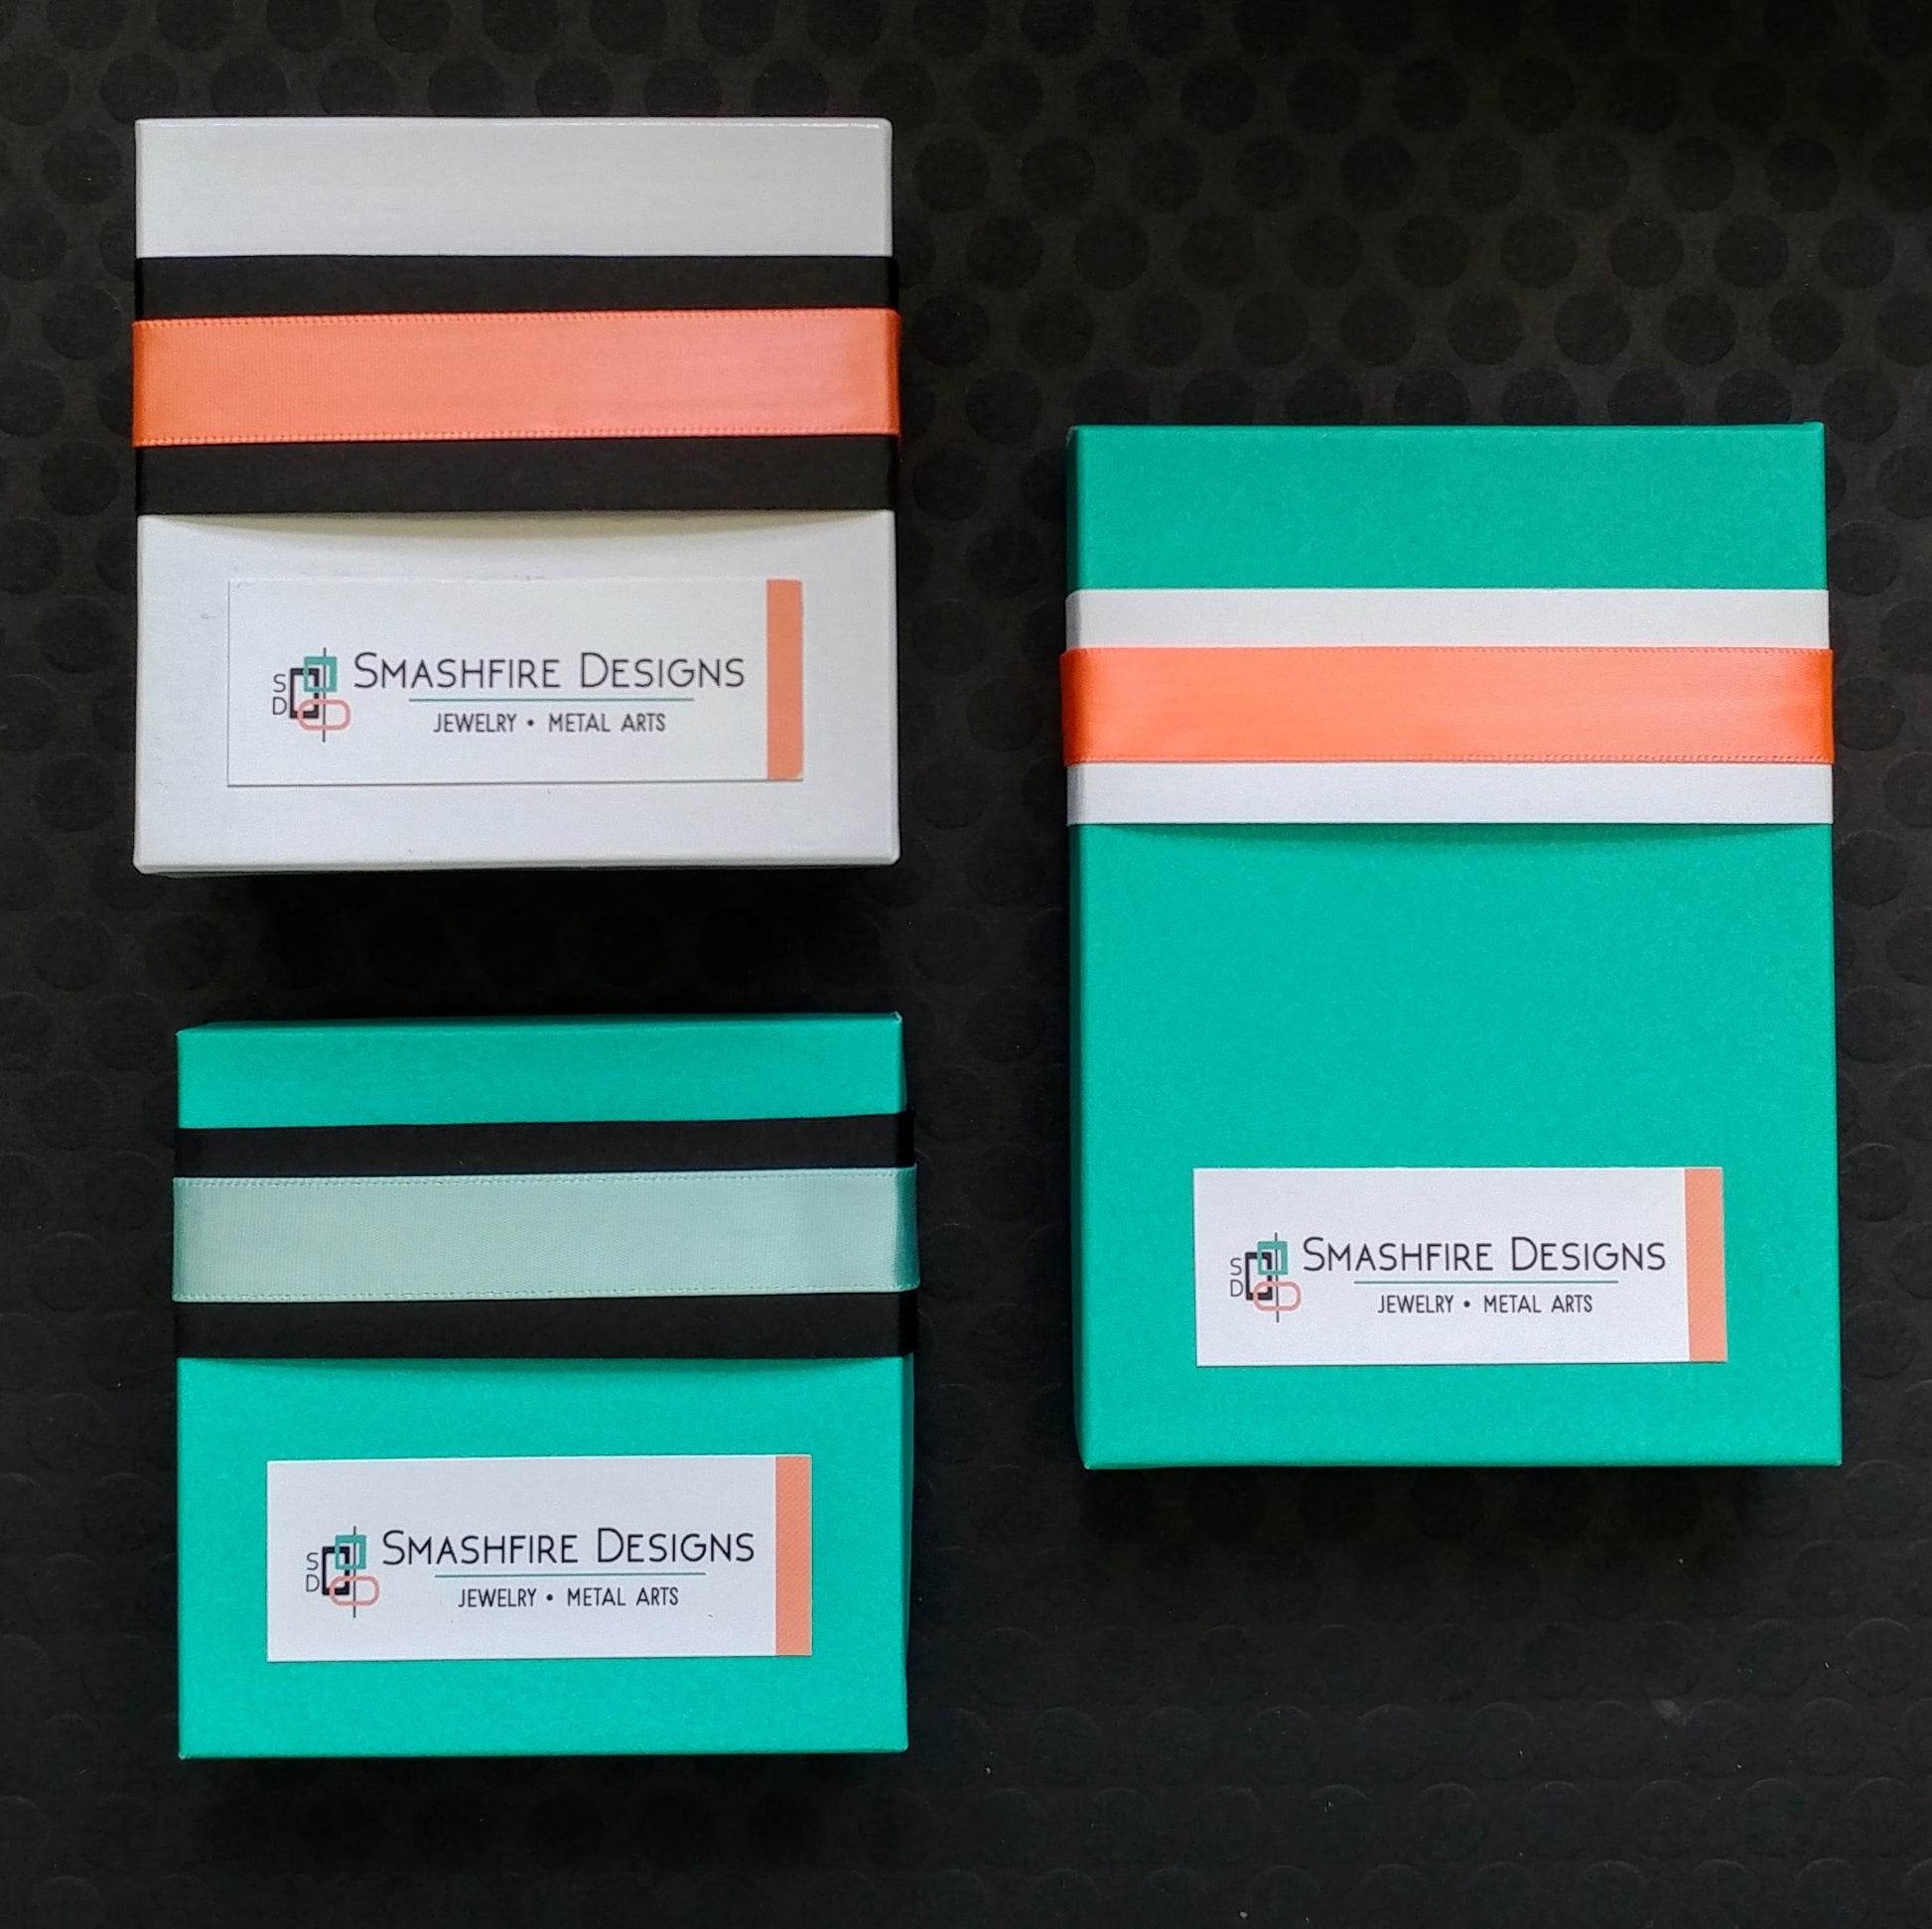 Teal and coral Smashfire Designs modernist packaging.